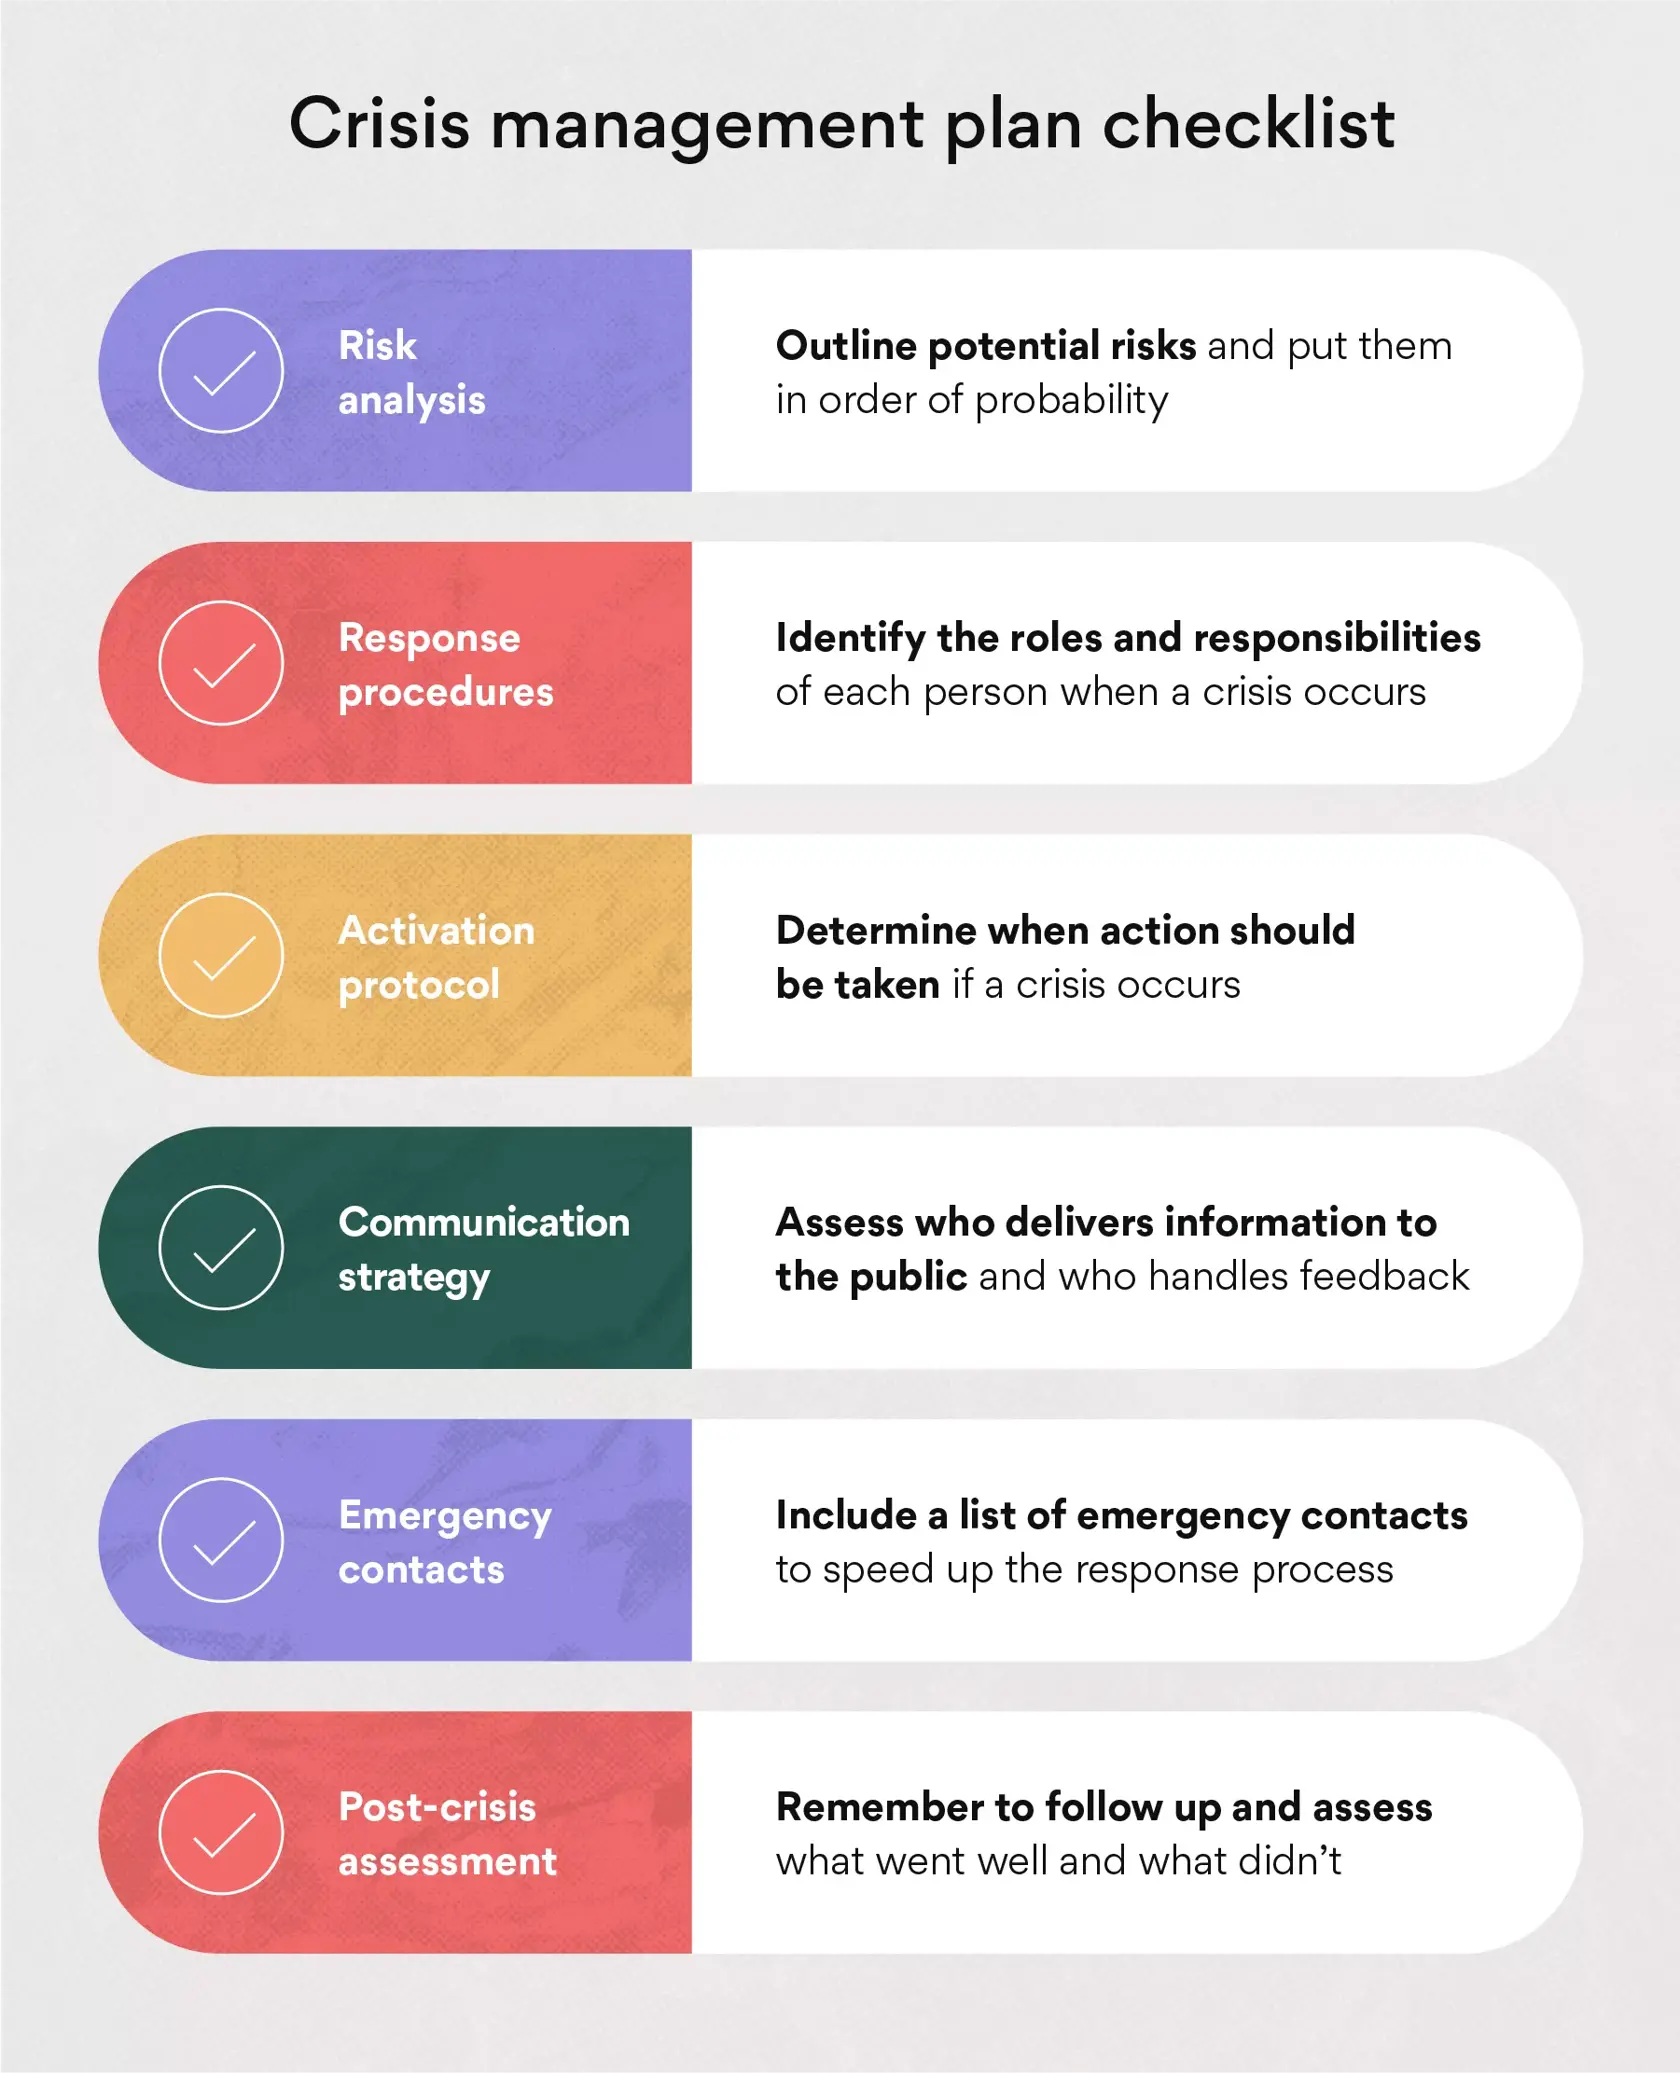 [inline illustration] What to include in a crisis management plan (infographic)